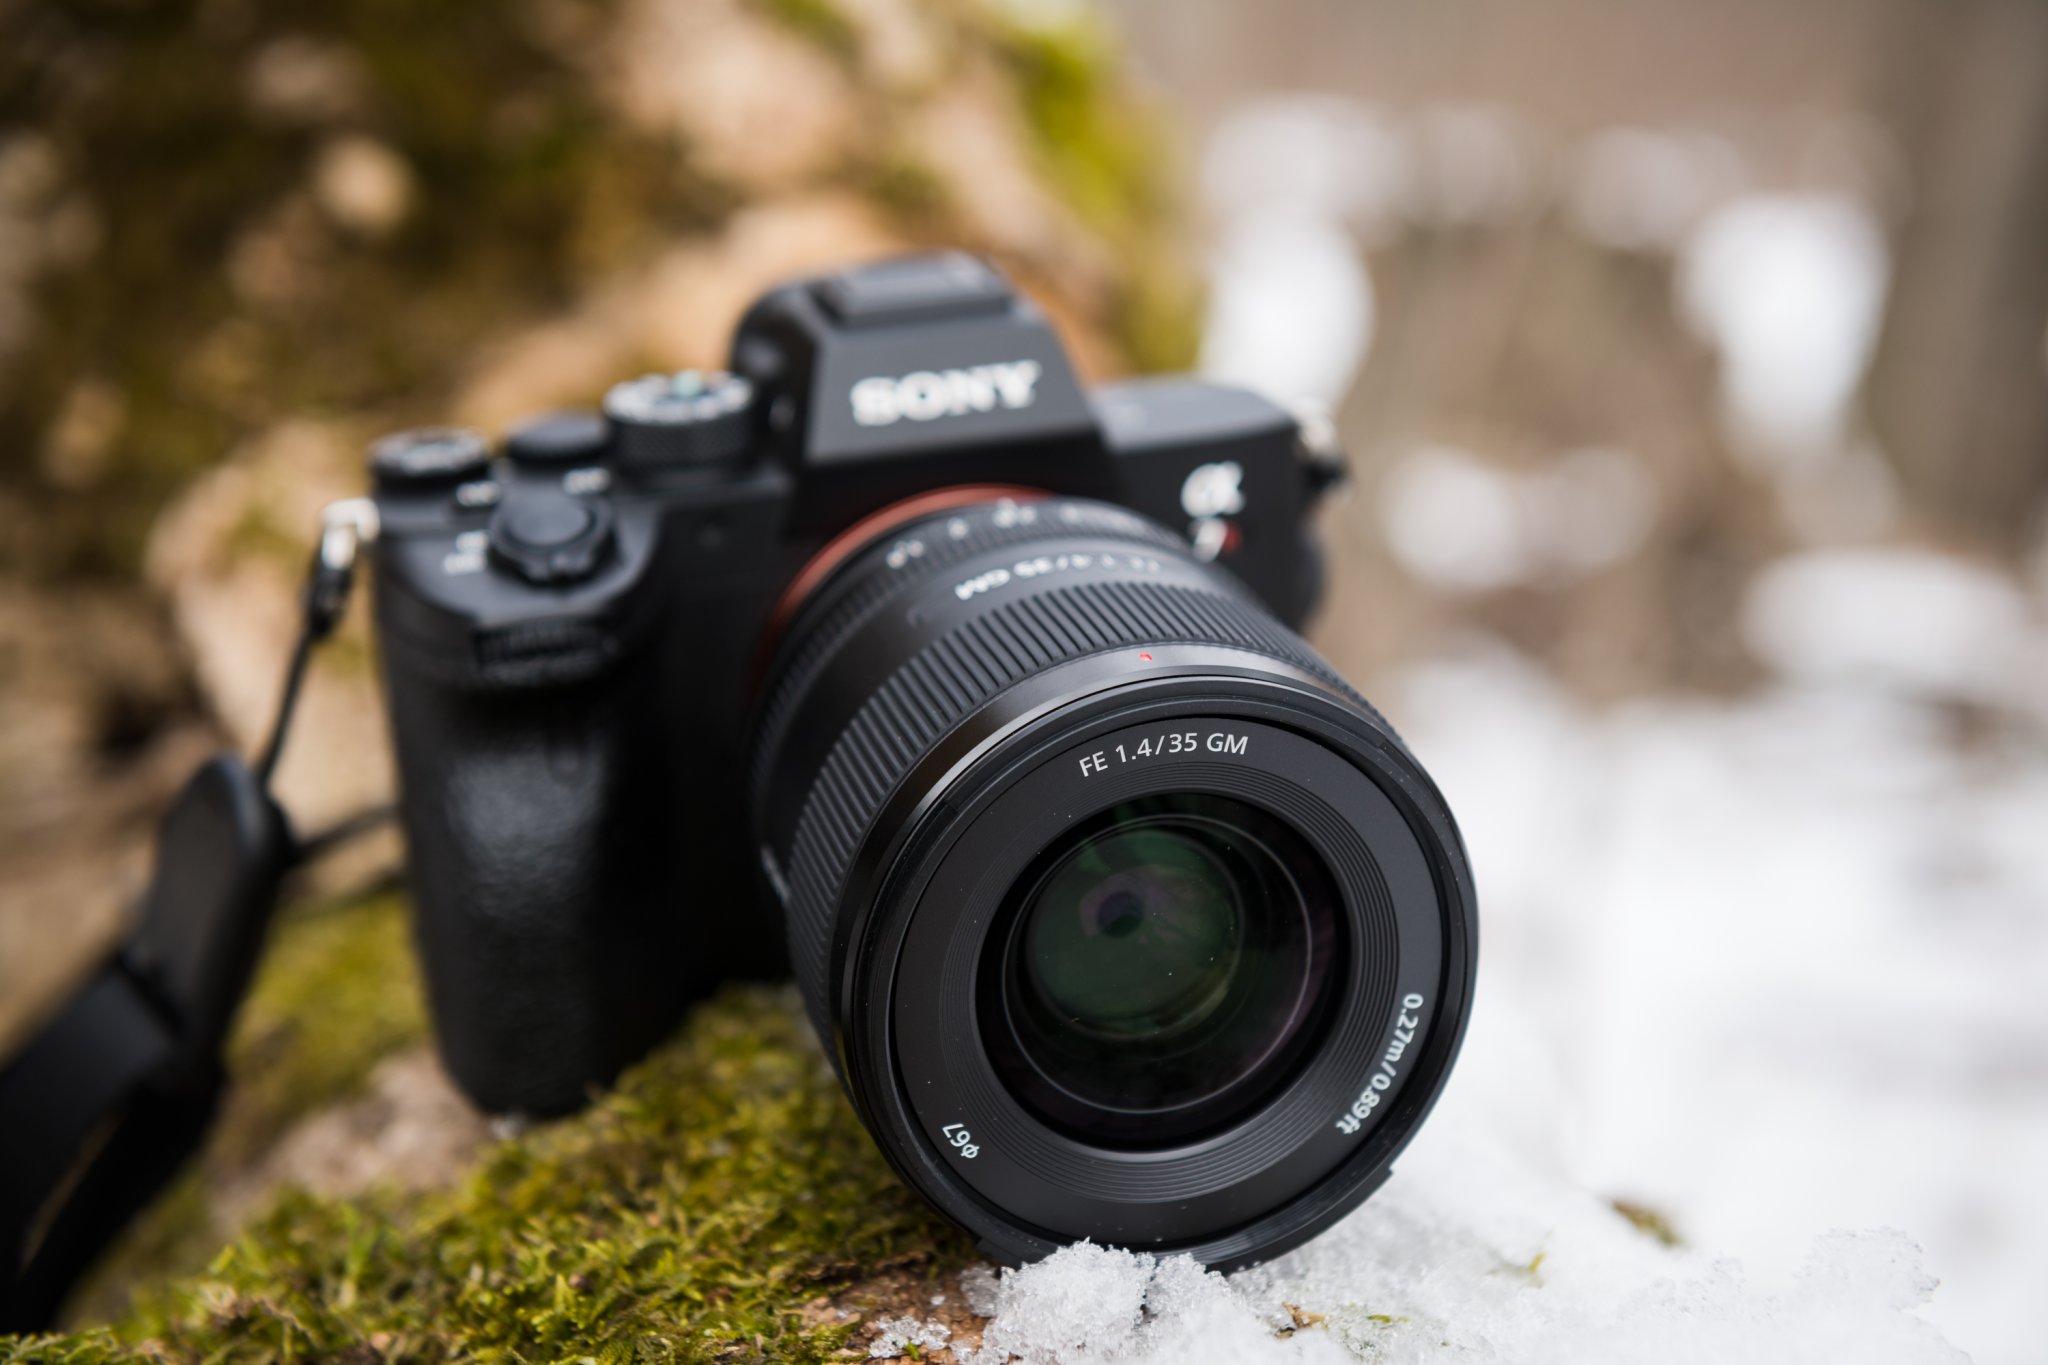 This f1.4 is Remarkably Light: Sony 35mm f1.4 GM Review